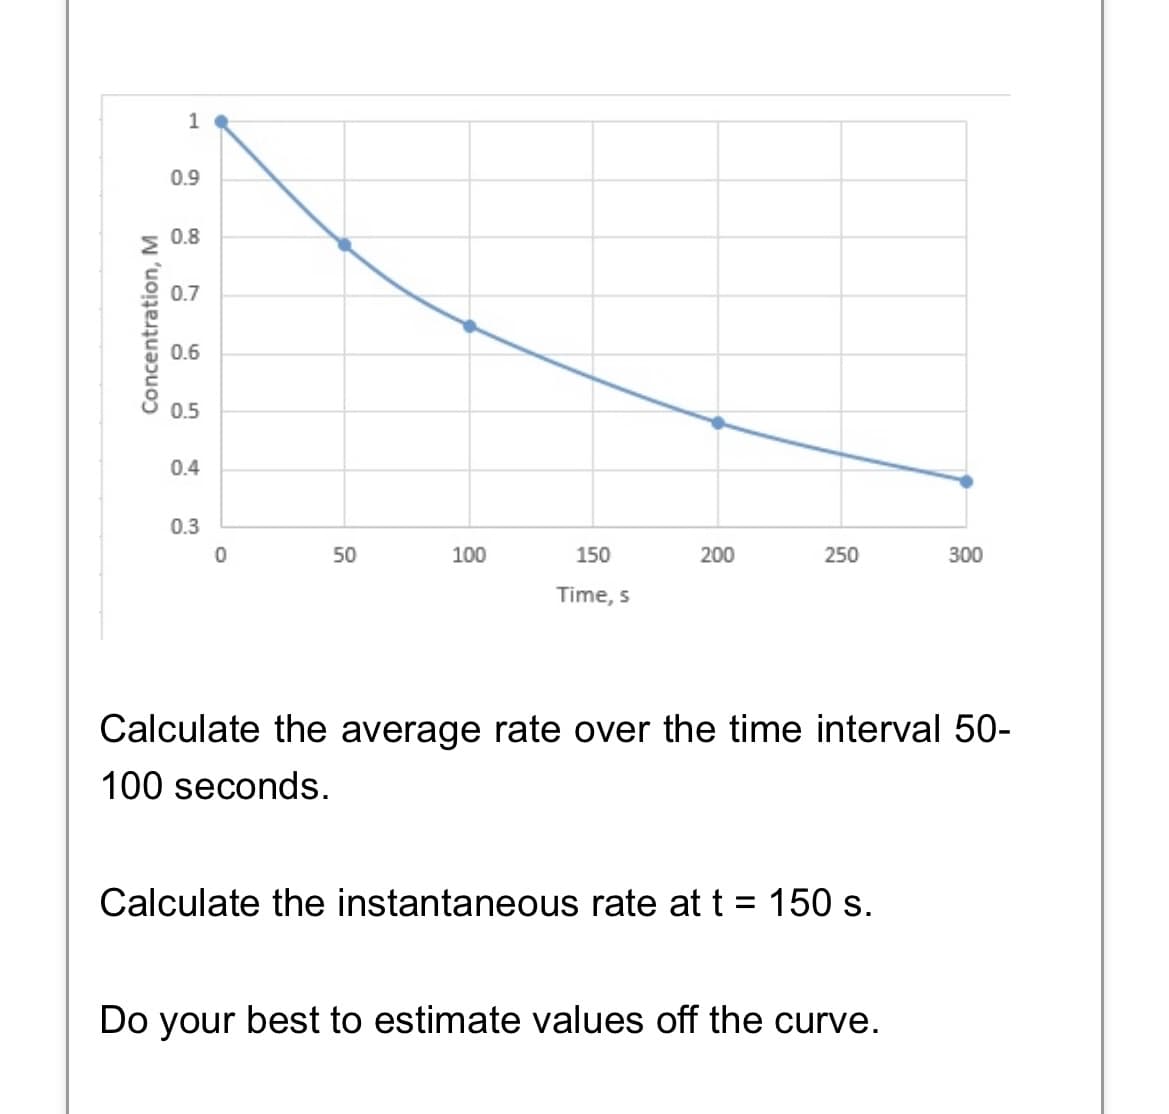 Concentration, M
1
0.9
0.8
0.7
0.6
0.5
0.4
0.3
0
50
100
150
Time, s
200
250
Calculate the average rate over the time interval 50-
100 seconds.
Calculate the instantaneous rate at t = 150 s.
300
Do your best to estimate values off the curve.